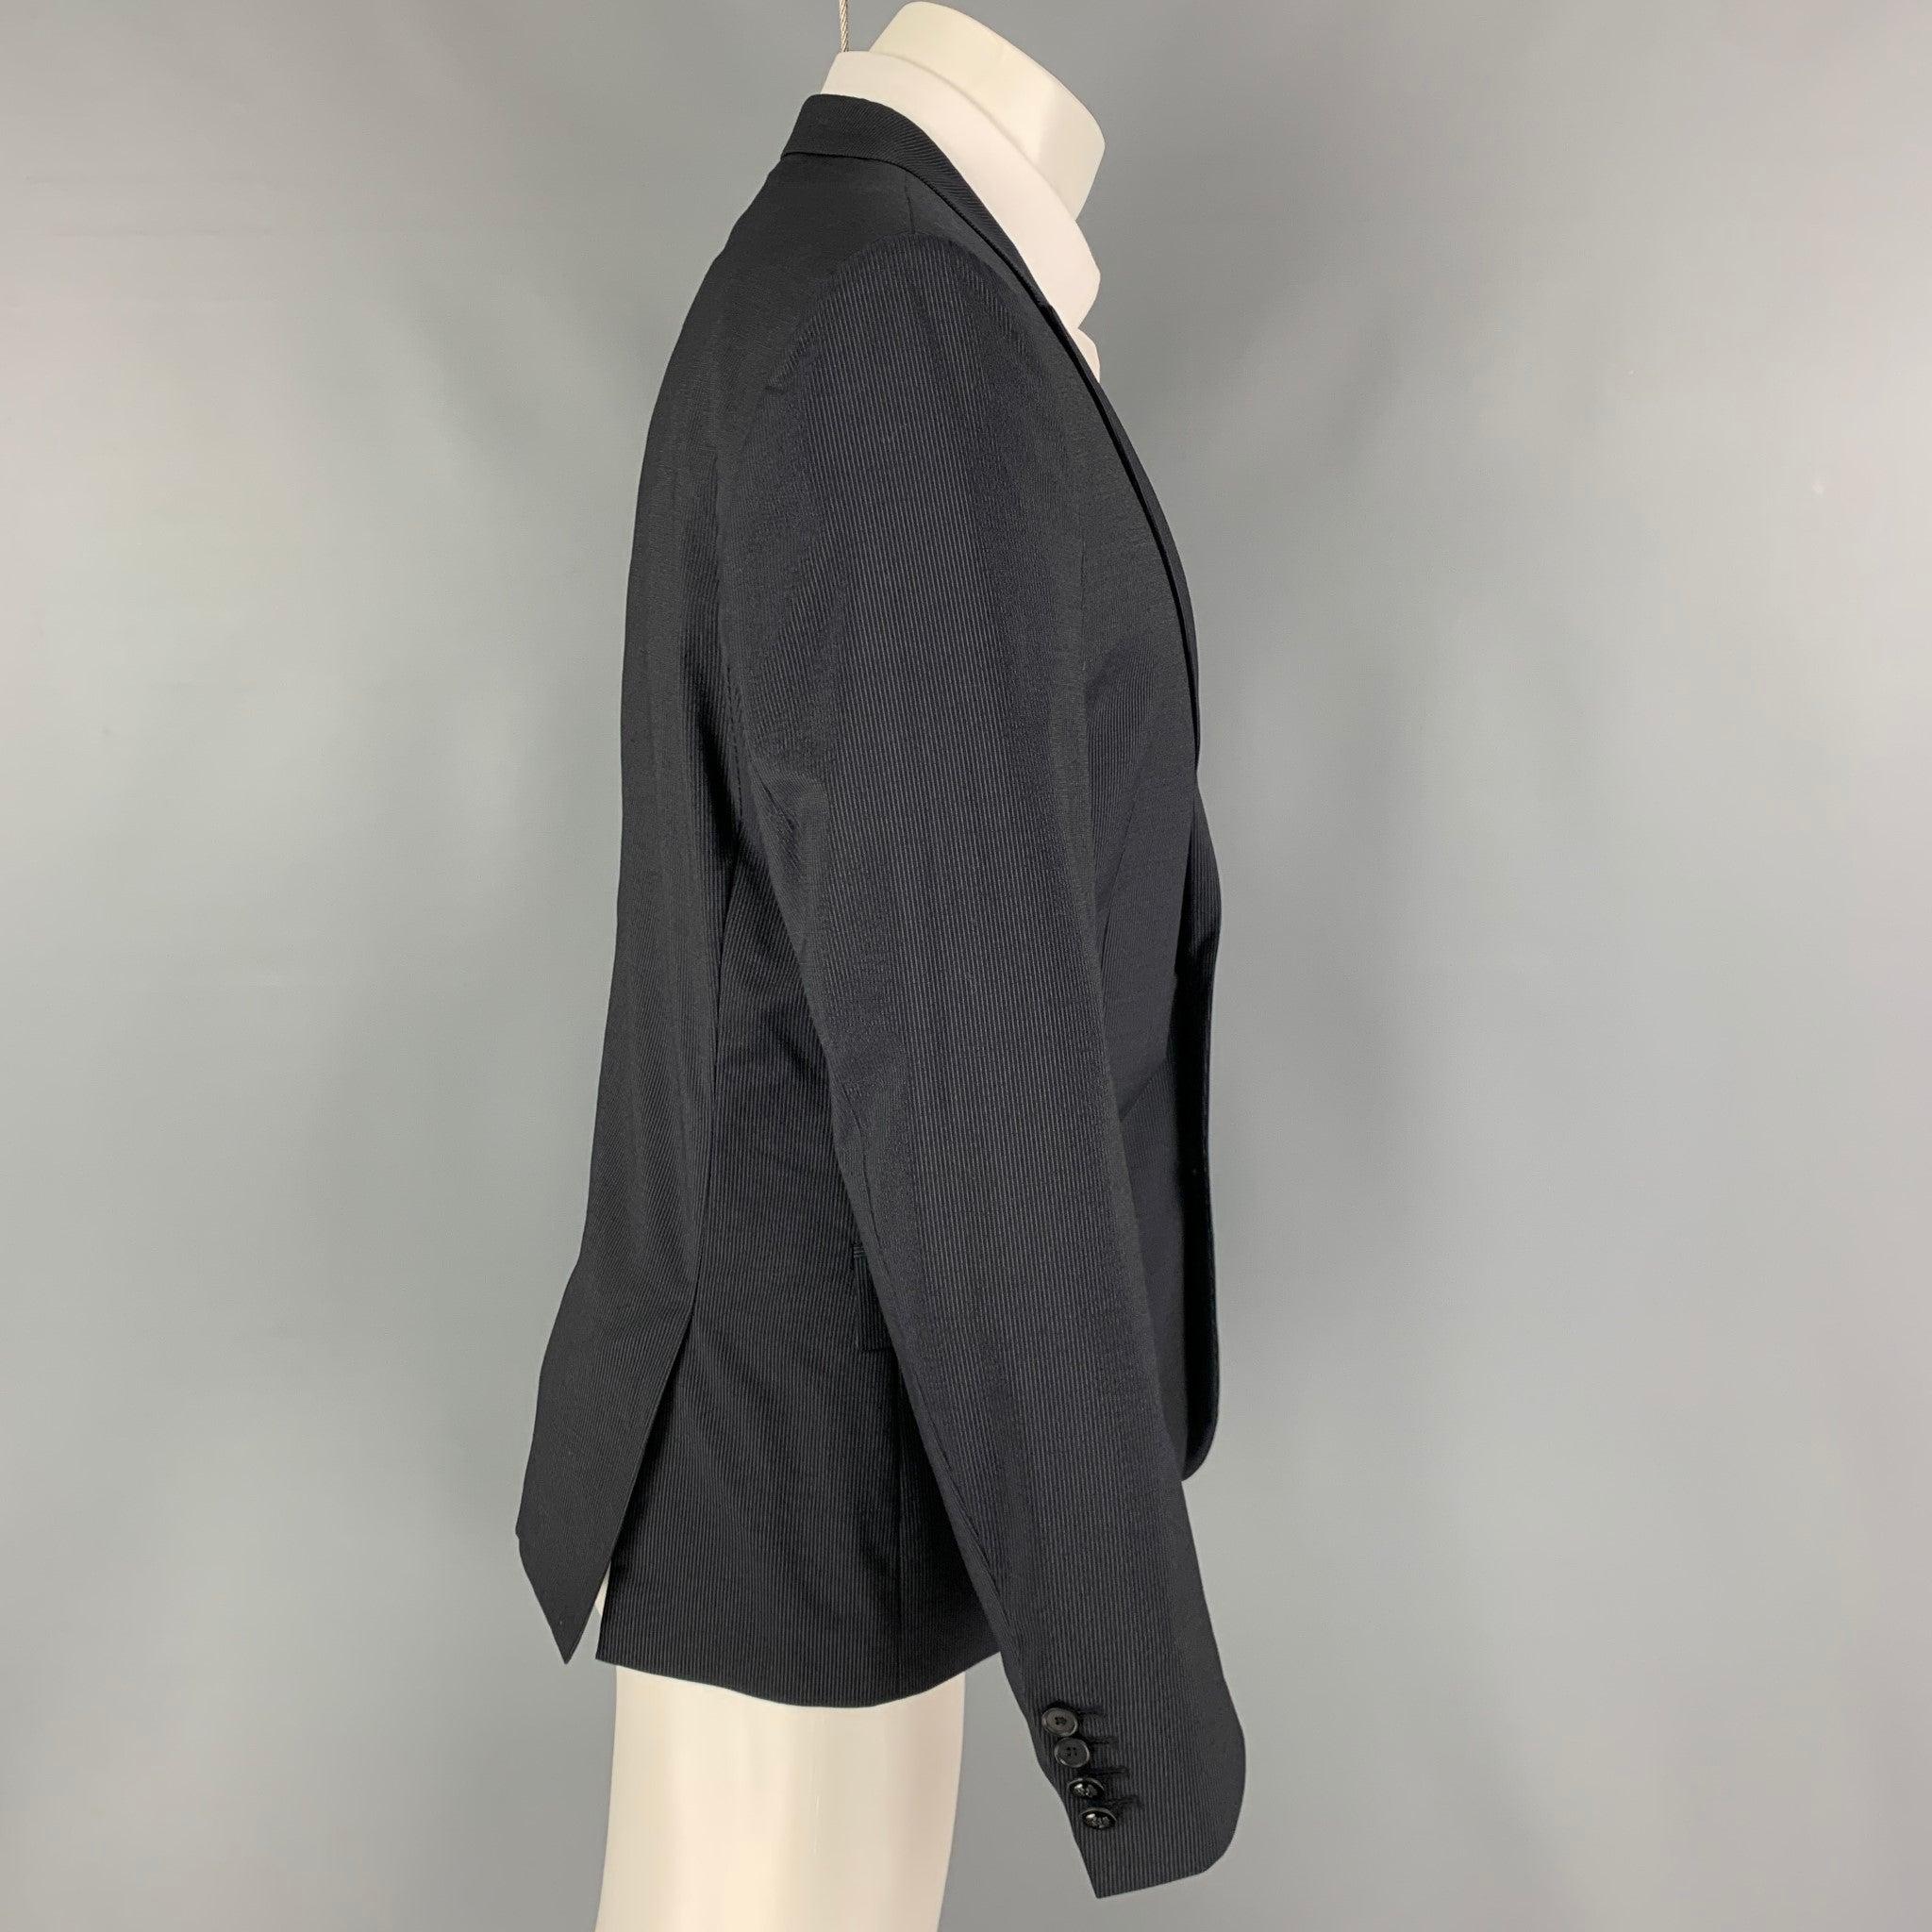 THE KOOPLES sport coat comes in a navy pinstripe wool with a full liner featuring a peak lapel, flap pockets, double back vent, and a double button closure.
Excellent
Pre-Owned Condition. 

Marked:   50 

Measurements: 
 
Shoulder: 18 inches Chest: